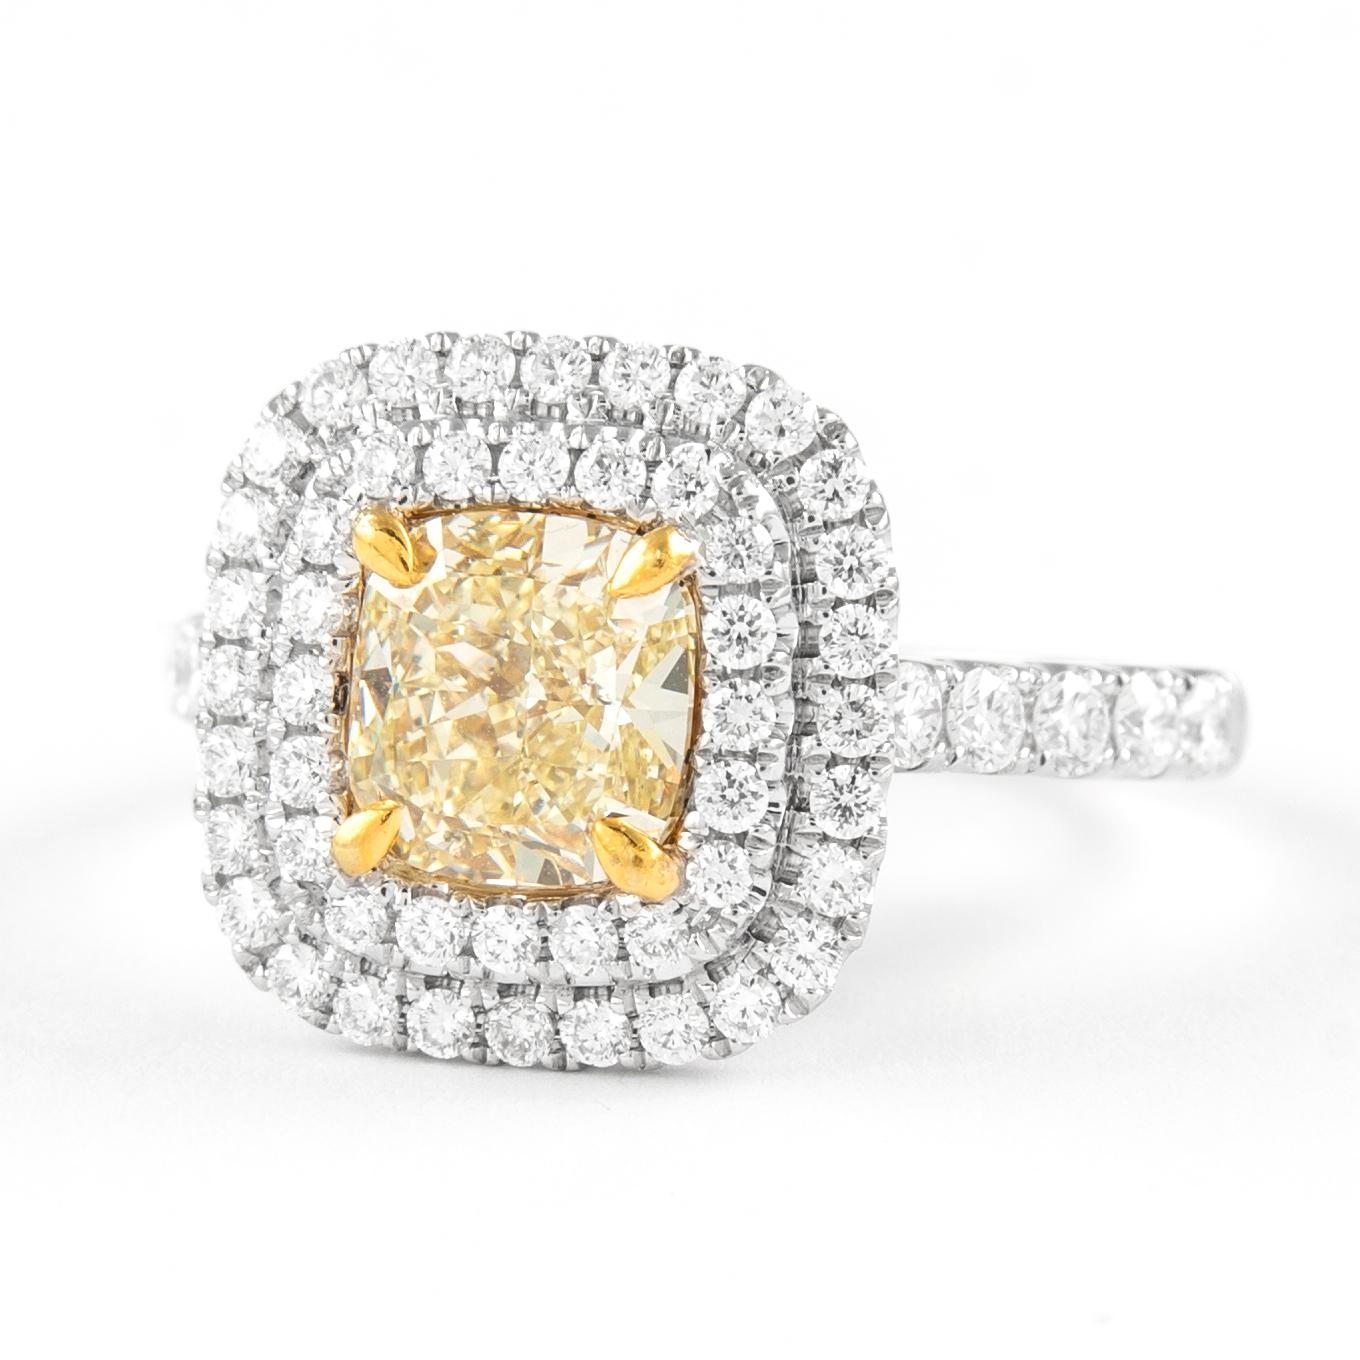 Contemporary Alexander 2.29ctt Fancy Yellow VS2 Diamond Double Halo Ring 18k Two Tone For Sale